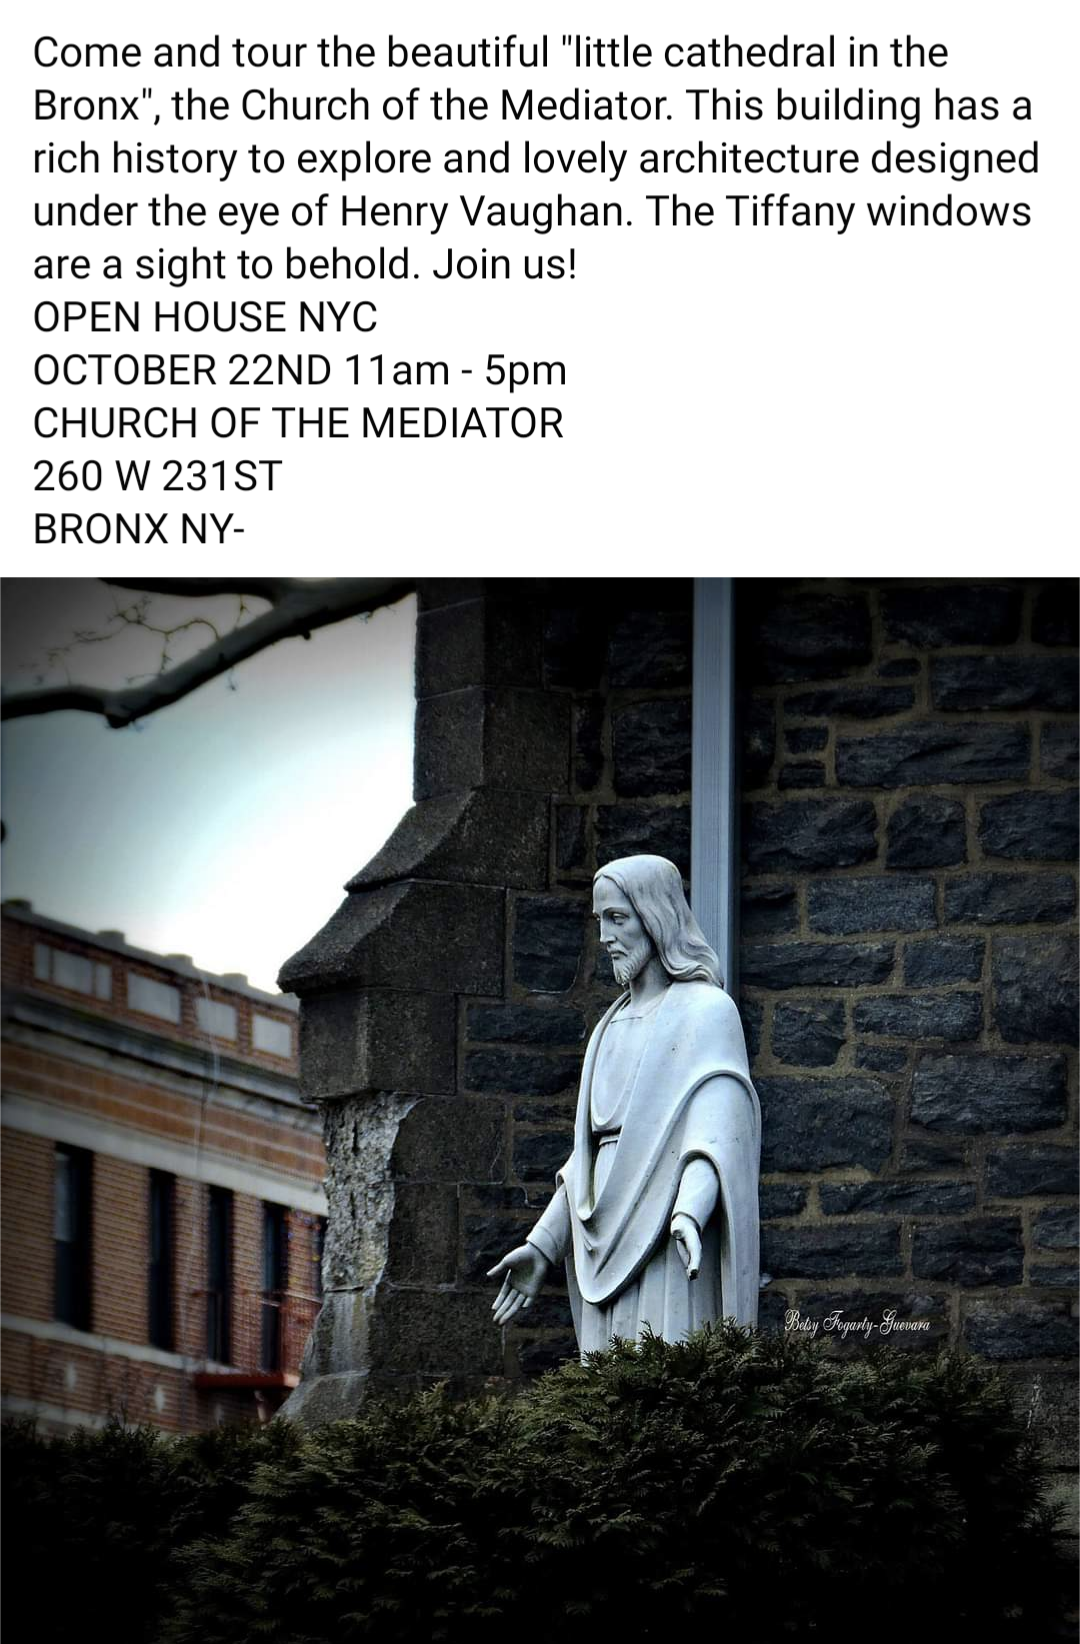 Church of the Mediator - Open House